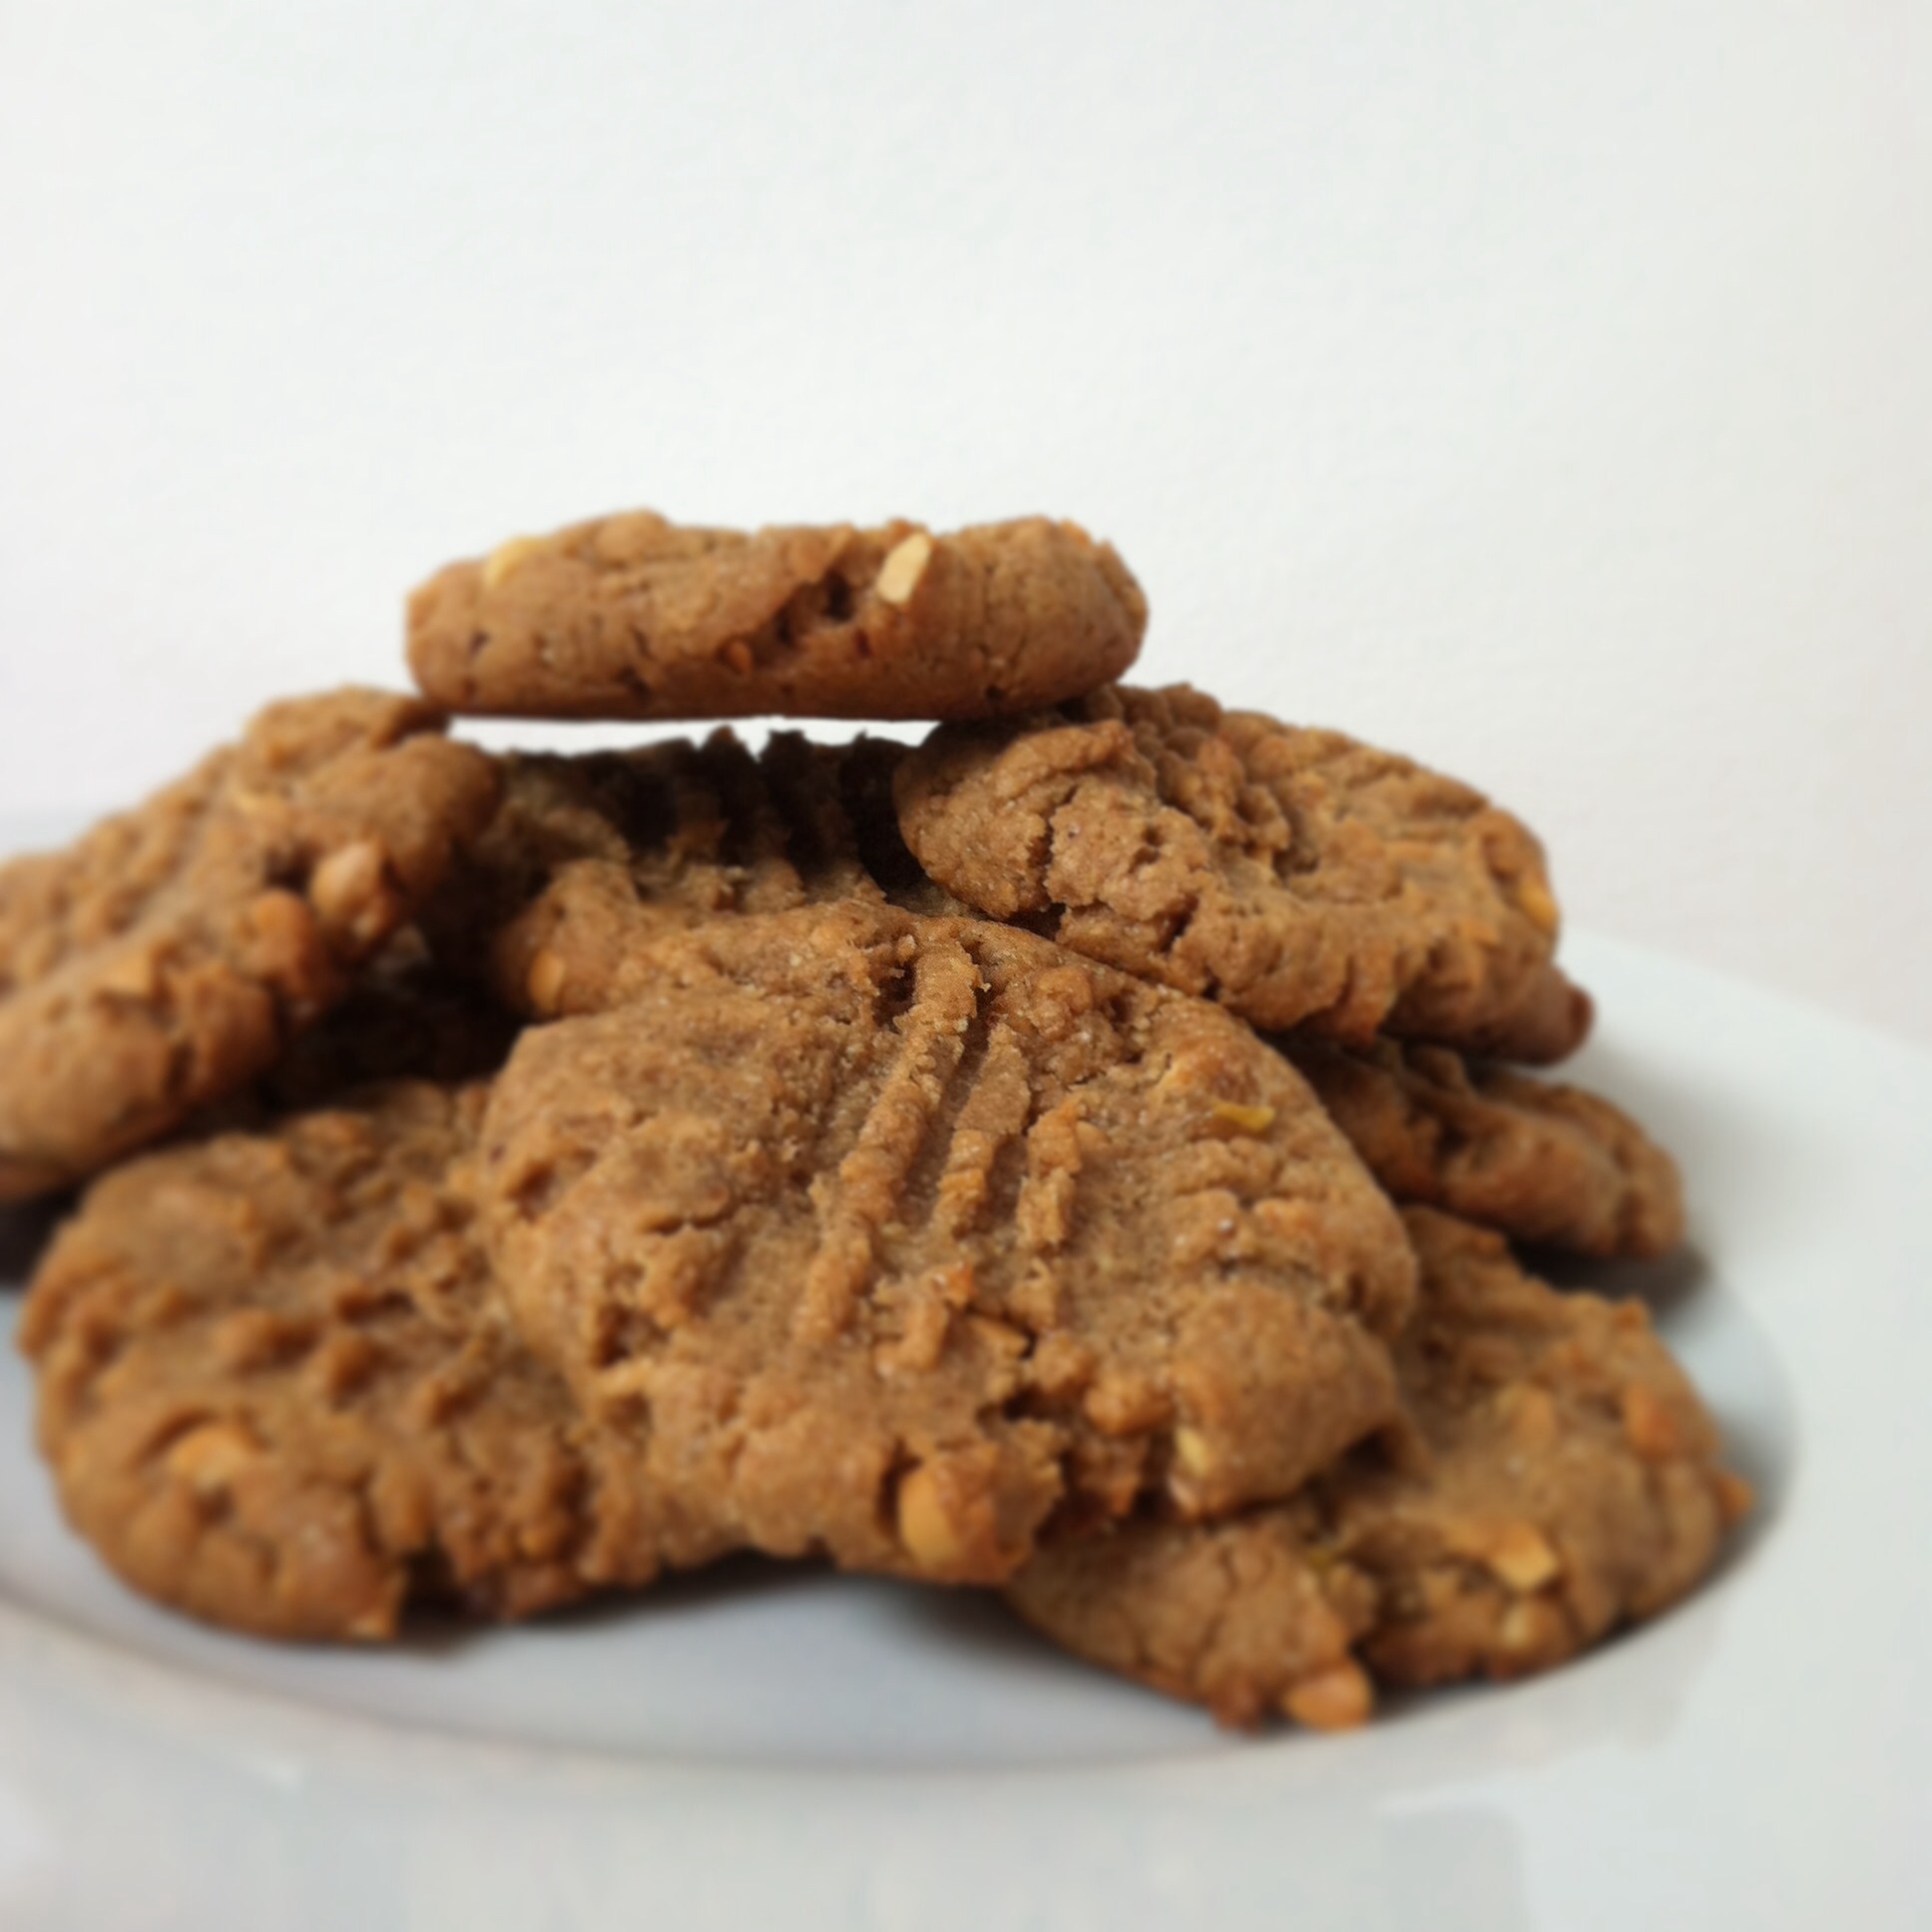 lunchboxbunch.com’s 4-ingredient peanut butter cookies